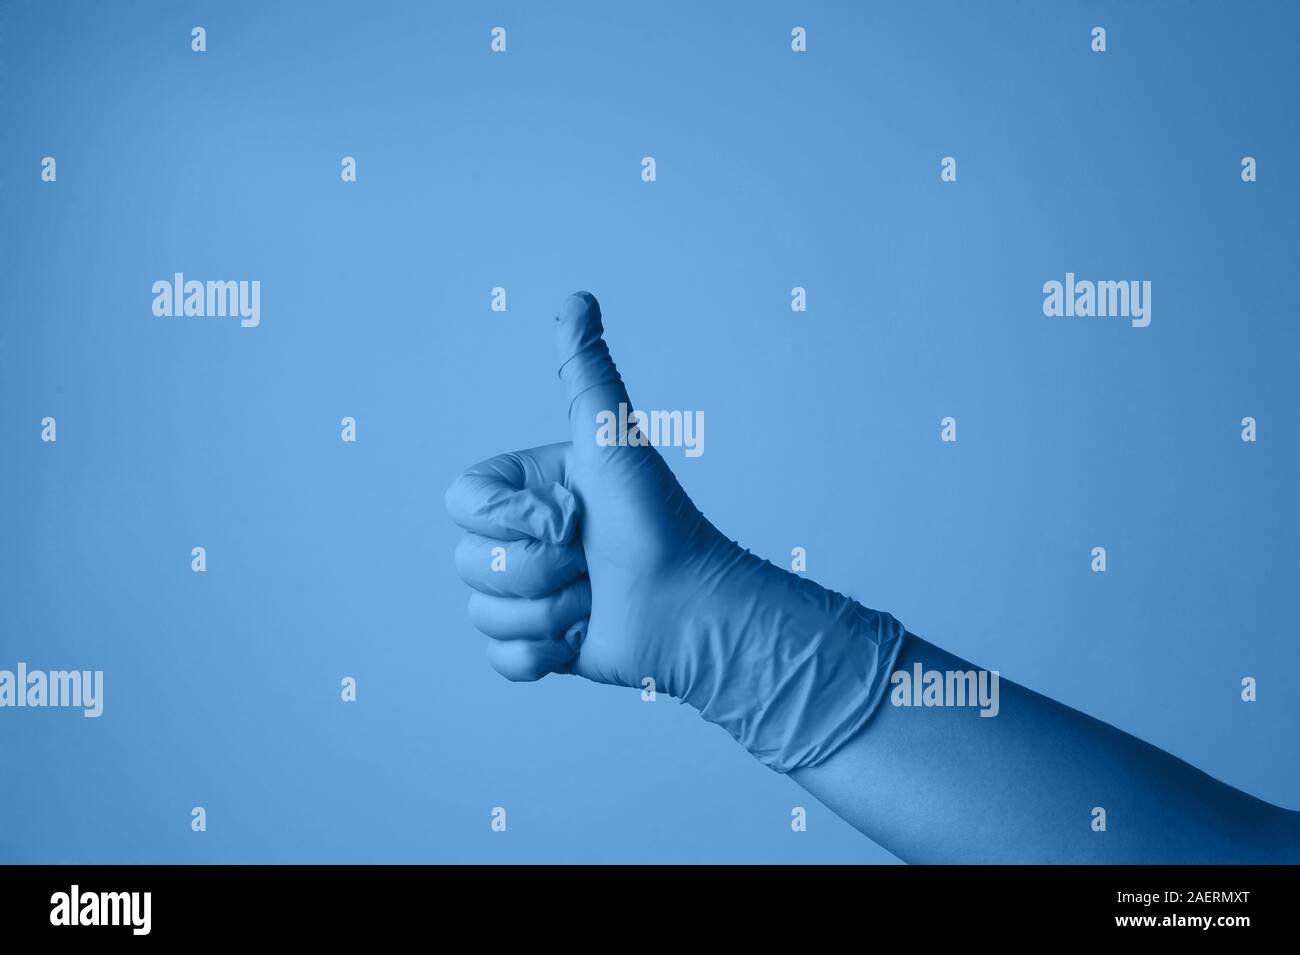 Hand in rubber glove in classic blue. Gesture. Creative composition in minimal style, flat lay. Color trend concept.Horizontal with space for text. Stock Photo